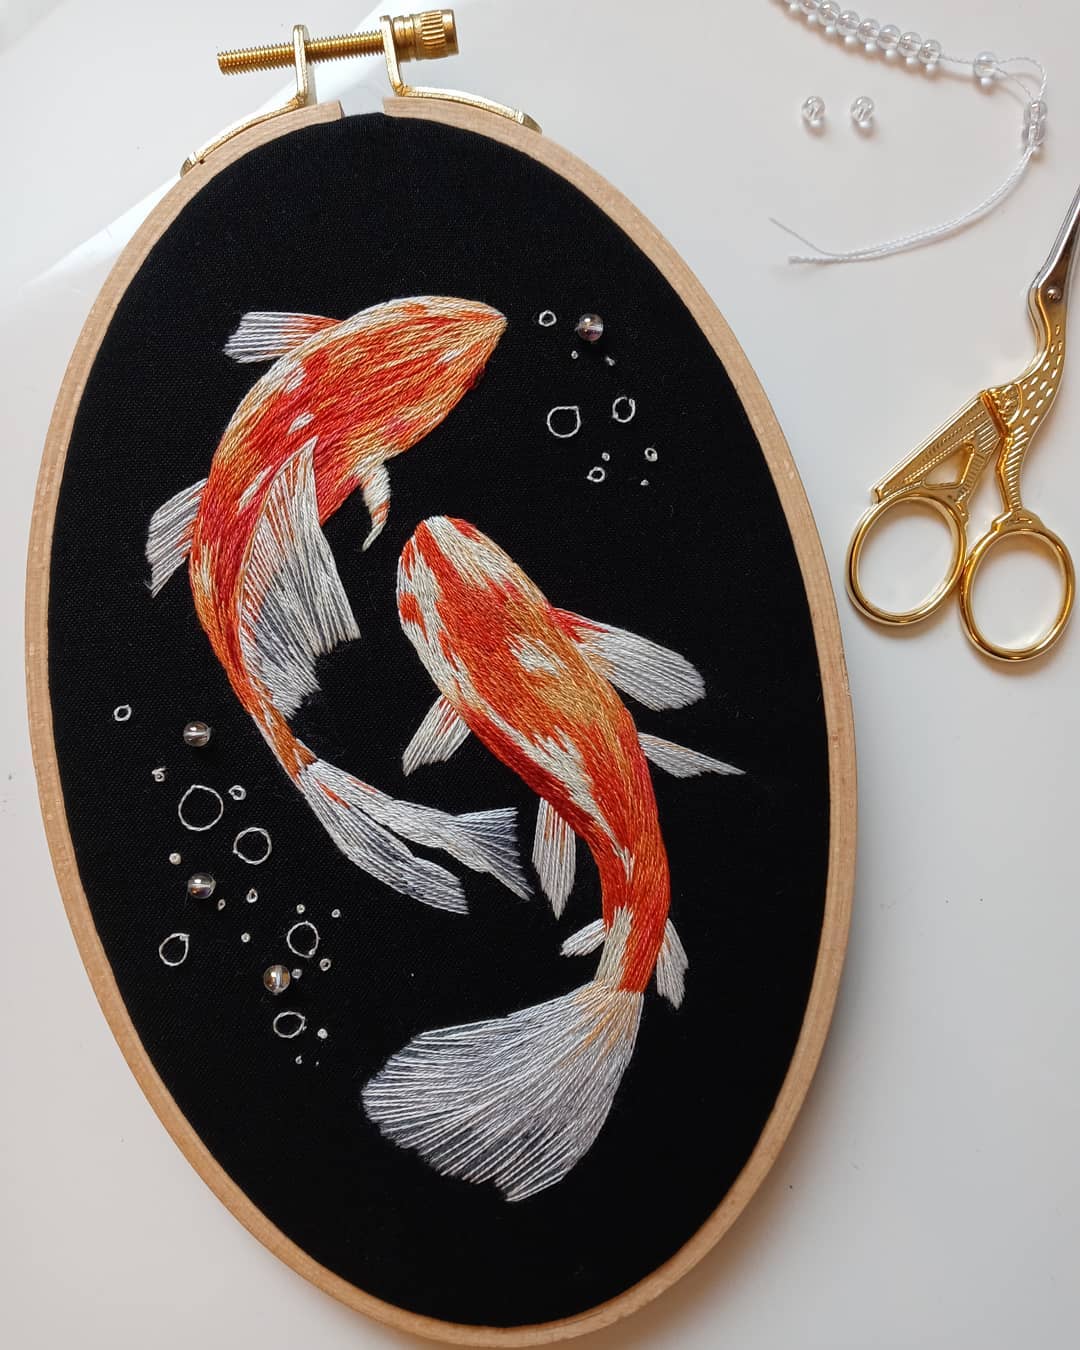 Gorgeous Embroideries Of Animals Plunging Into The Waters By Megan Zaniewski 7